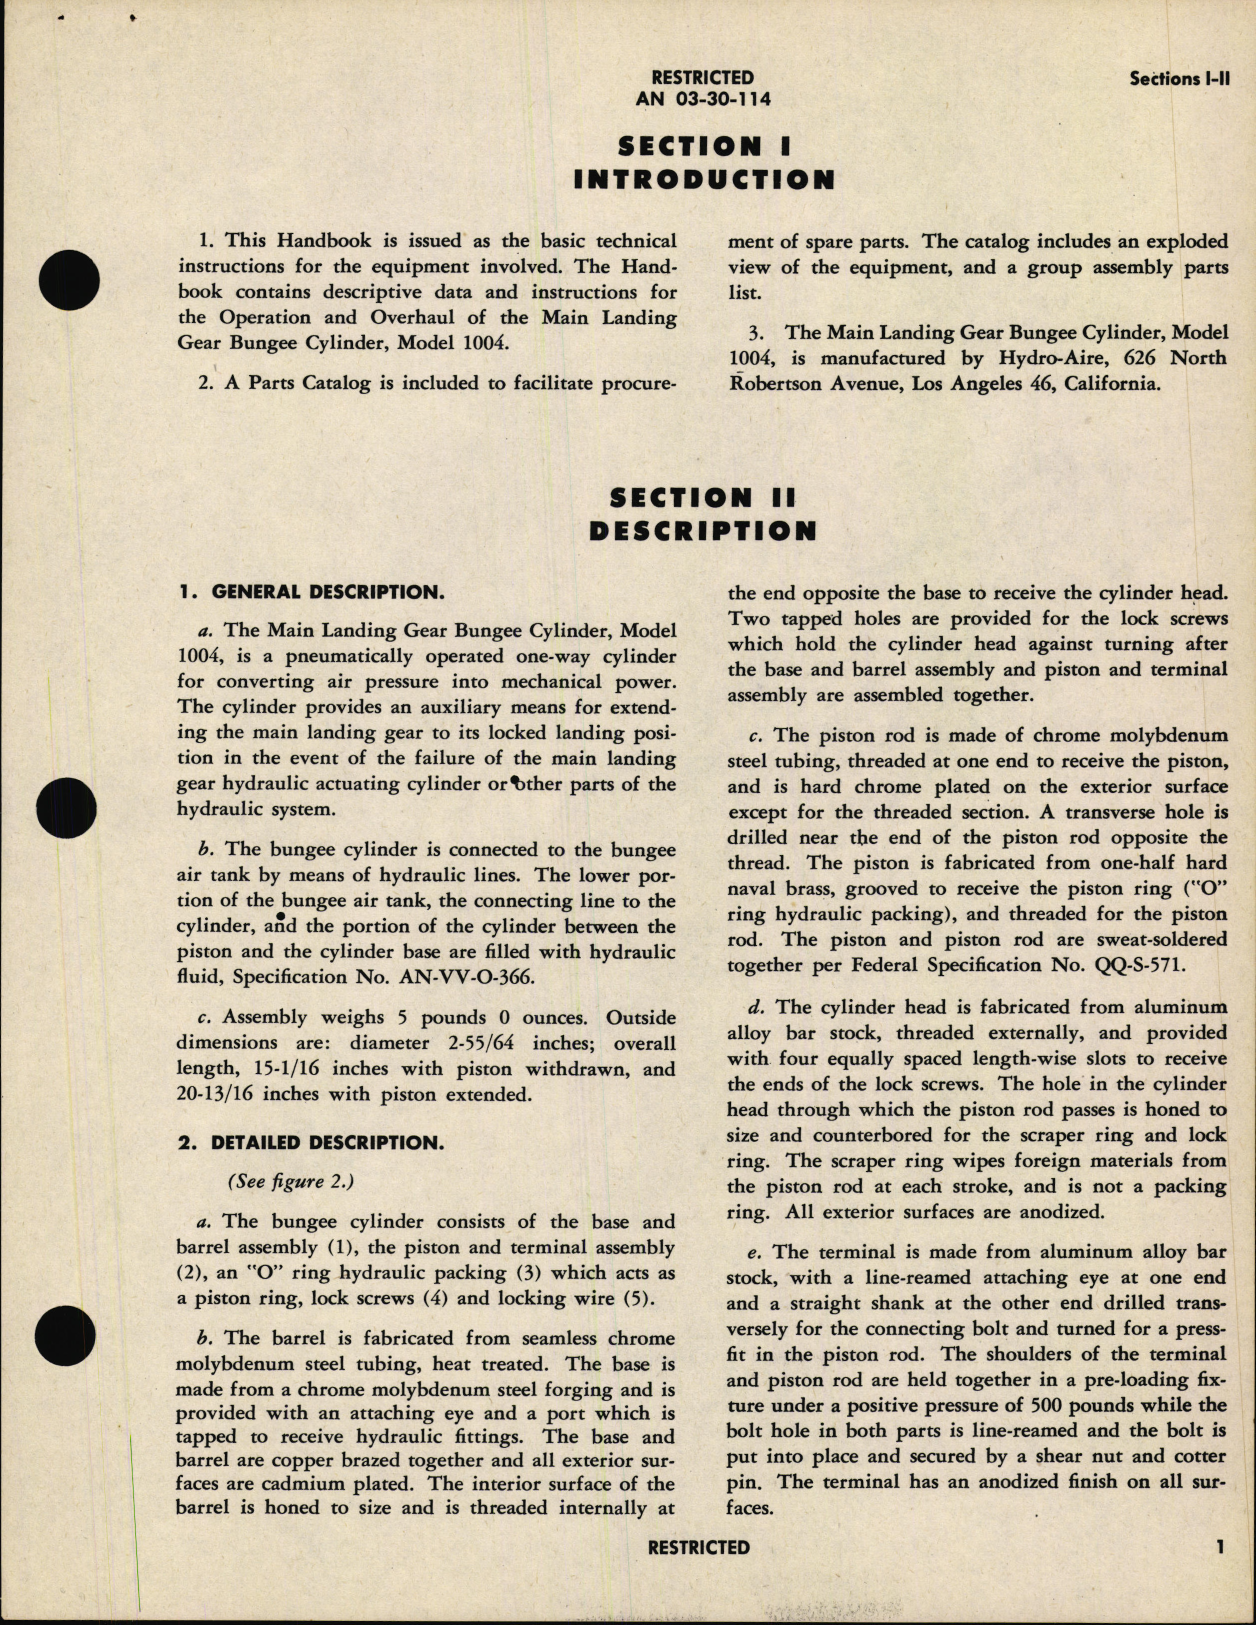 Sample page 5 from AirCorps Library document: Handbook of Overhaul Instructions with Parts Catalog Model 1004 Main Landing Gear Bungee Cylinder